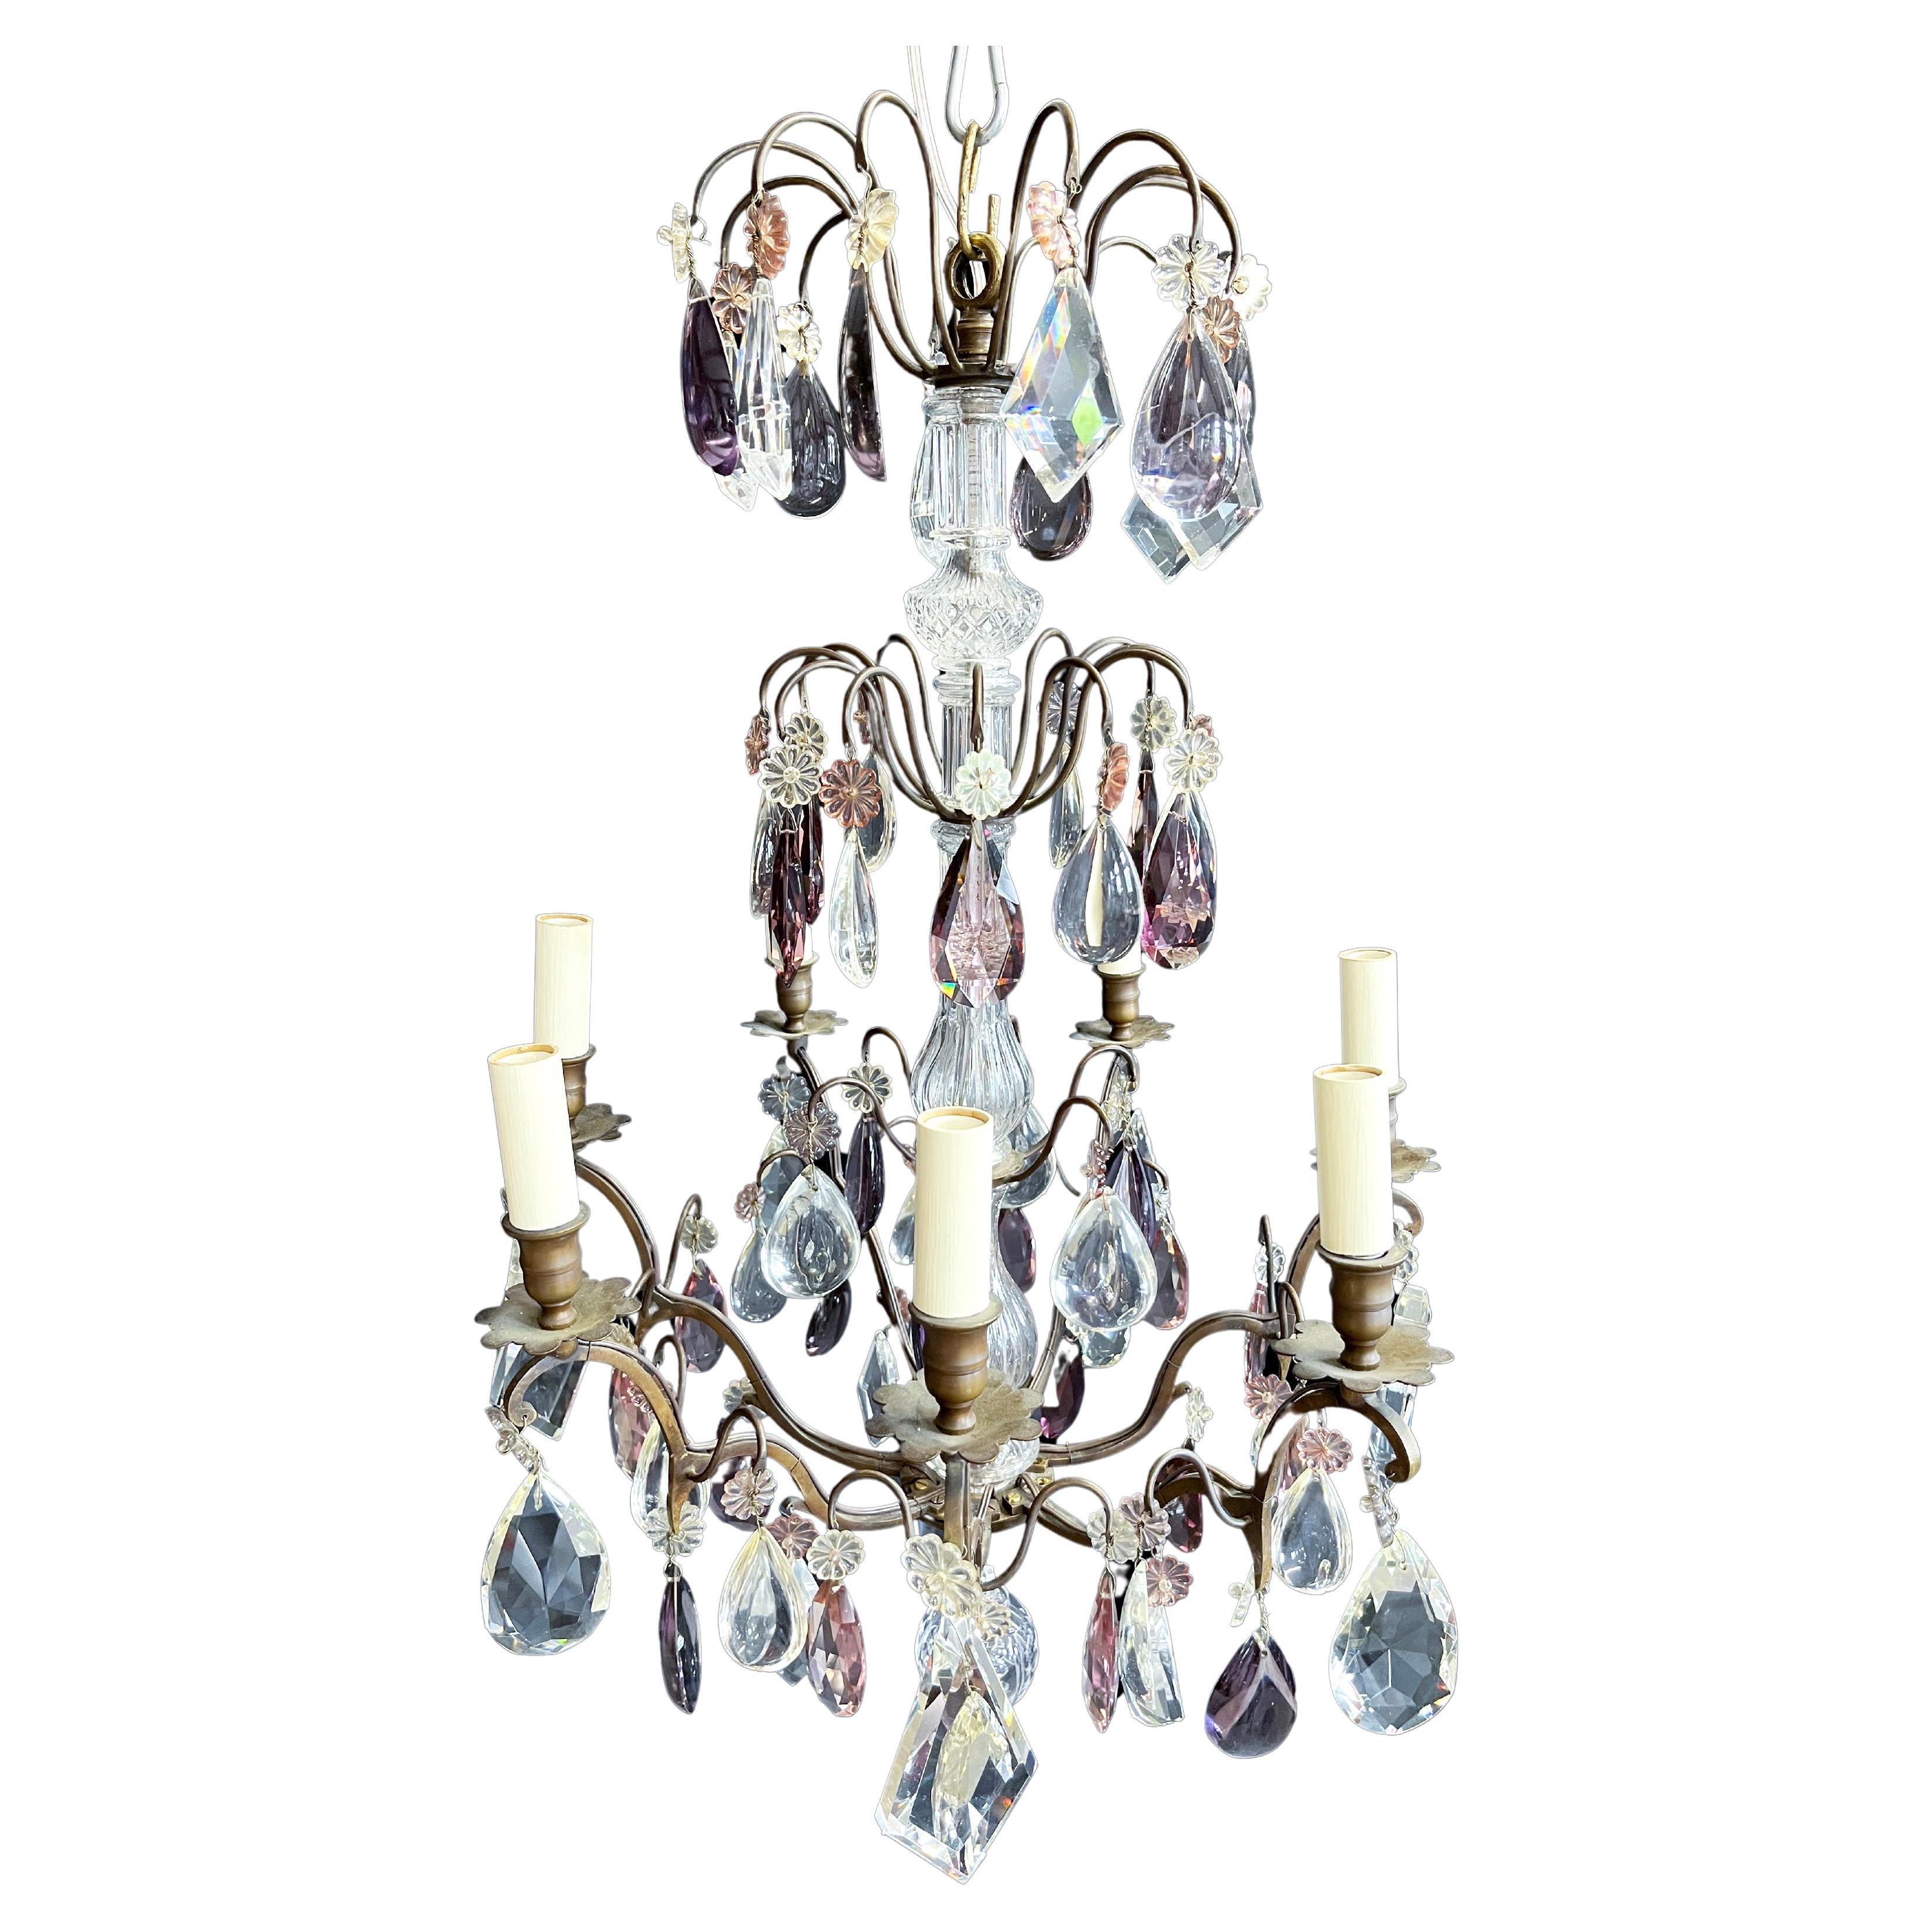 Mid-20th Century French Bronze 7 Light Chandelier with Amethyst Pear Drops For Sale